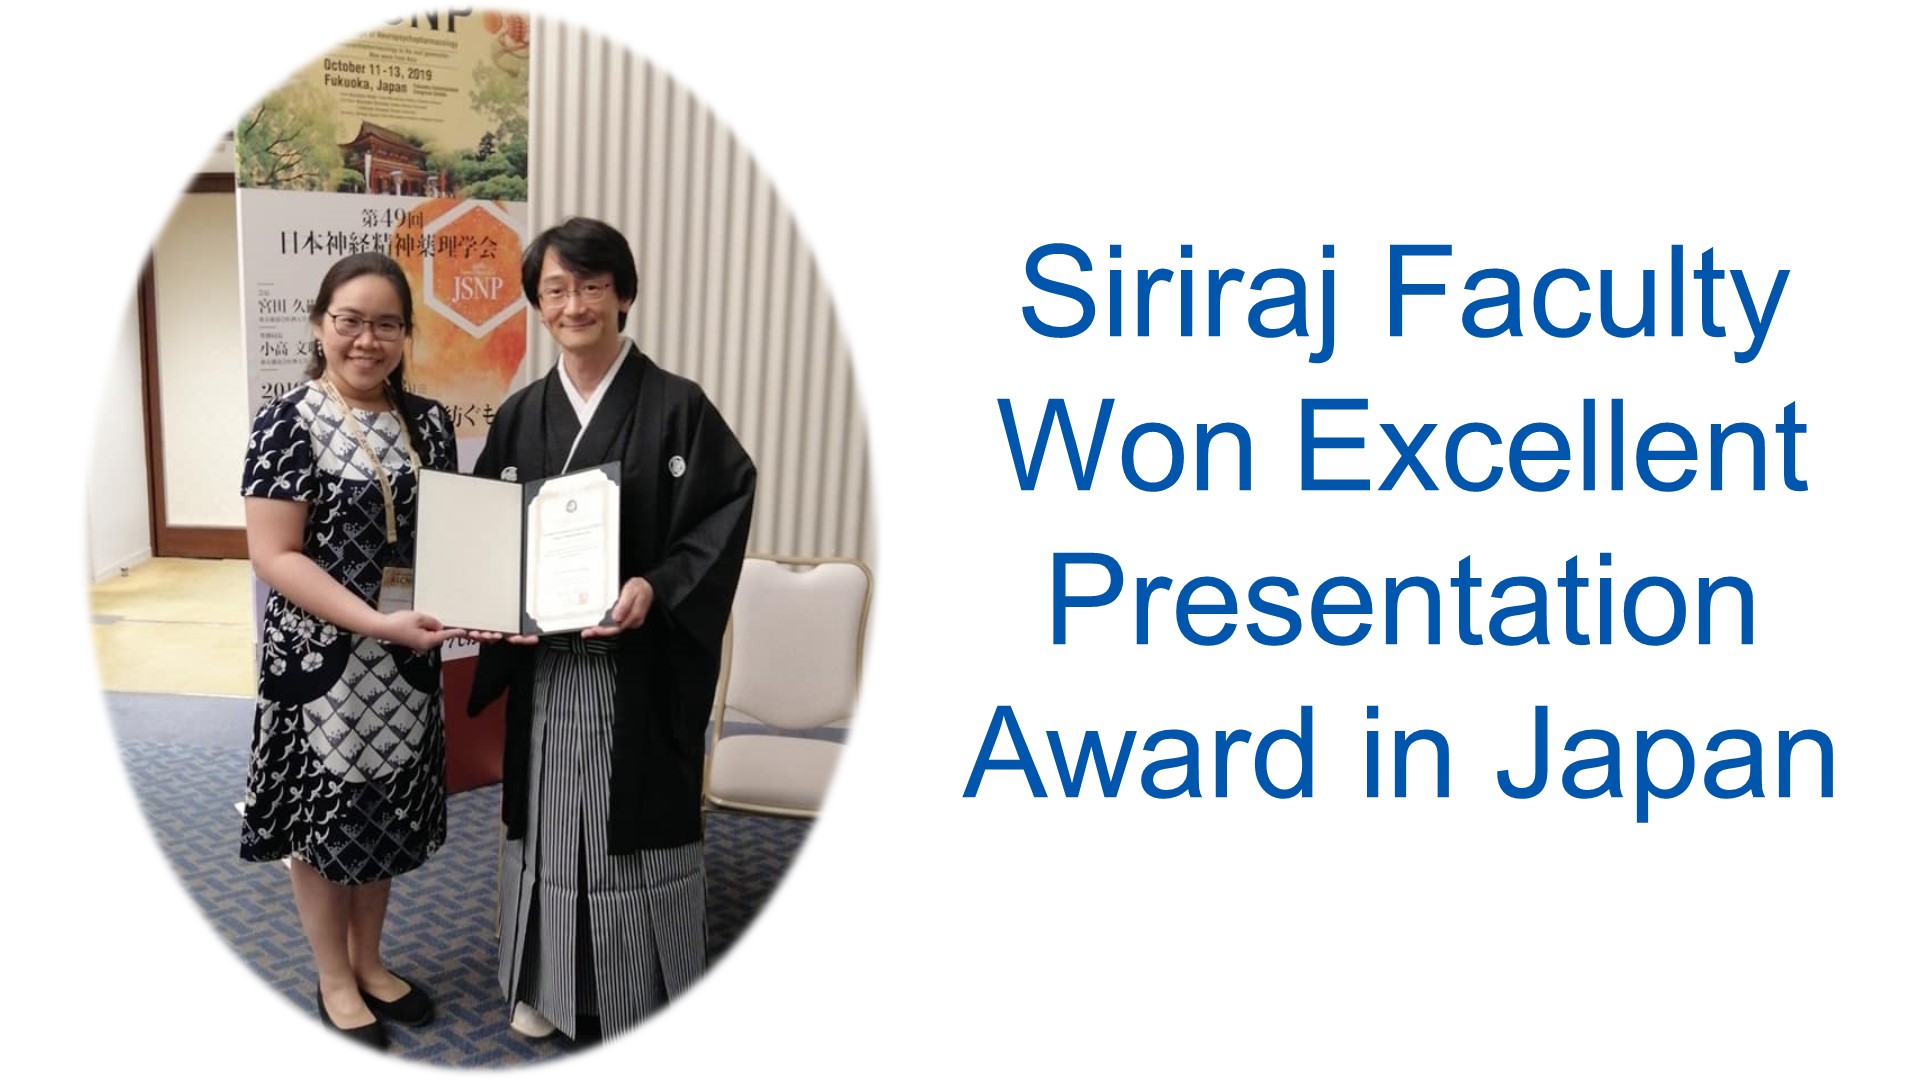 Siriraj Faculty Won the Excellent Research Presentation Award in Japan